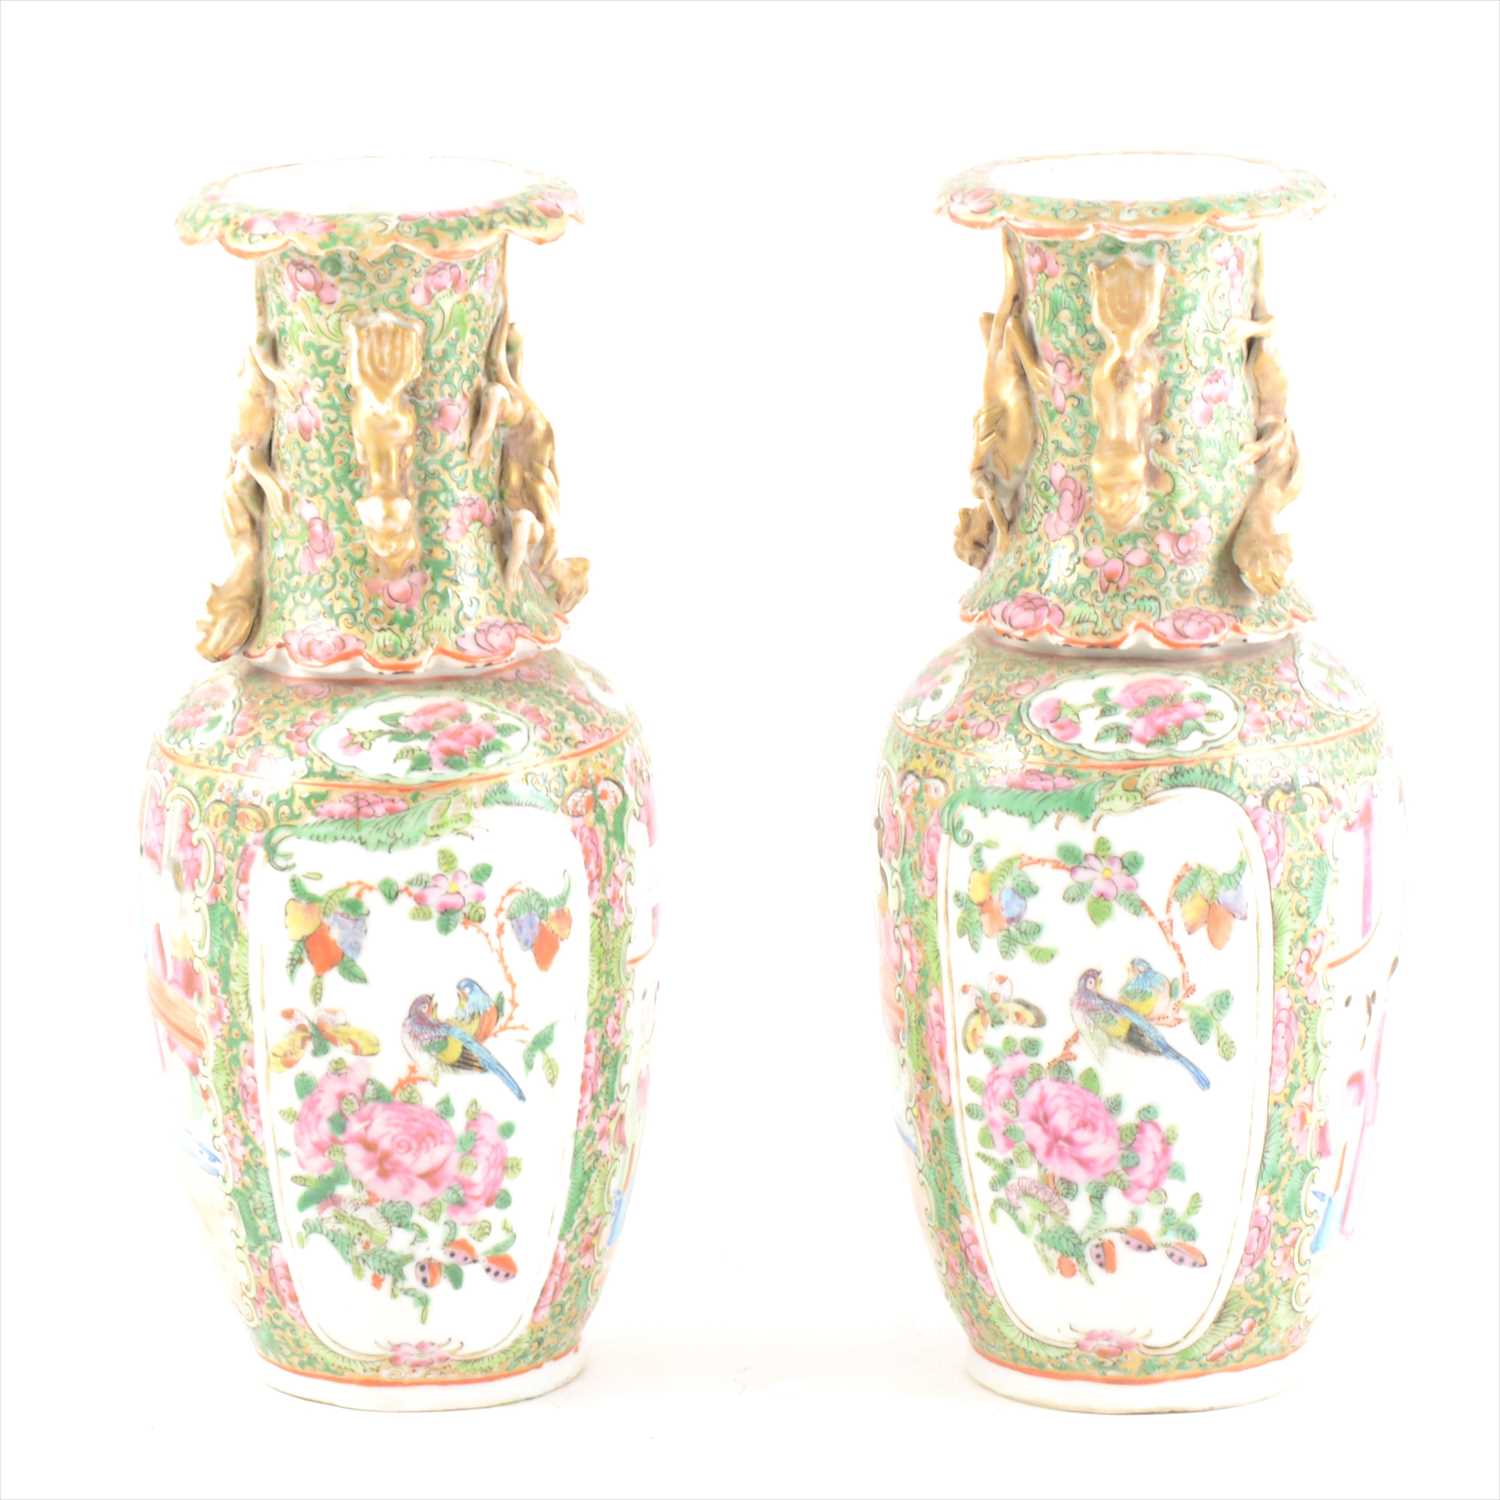 Lot 60 - Pair of small Cantonese famille rose vases